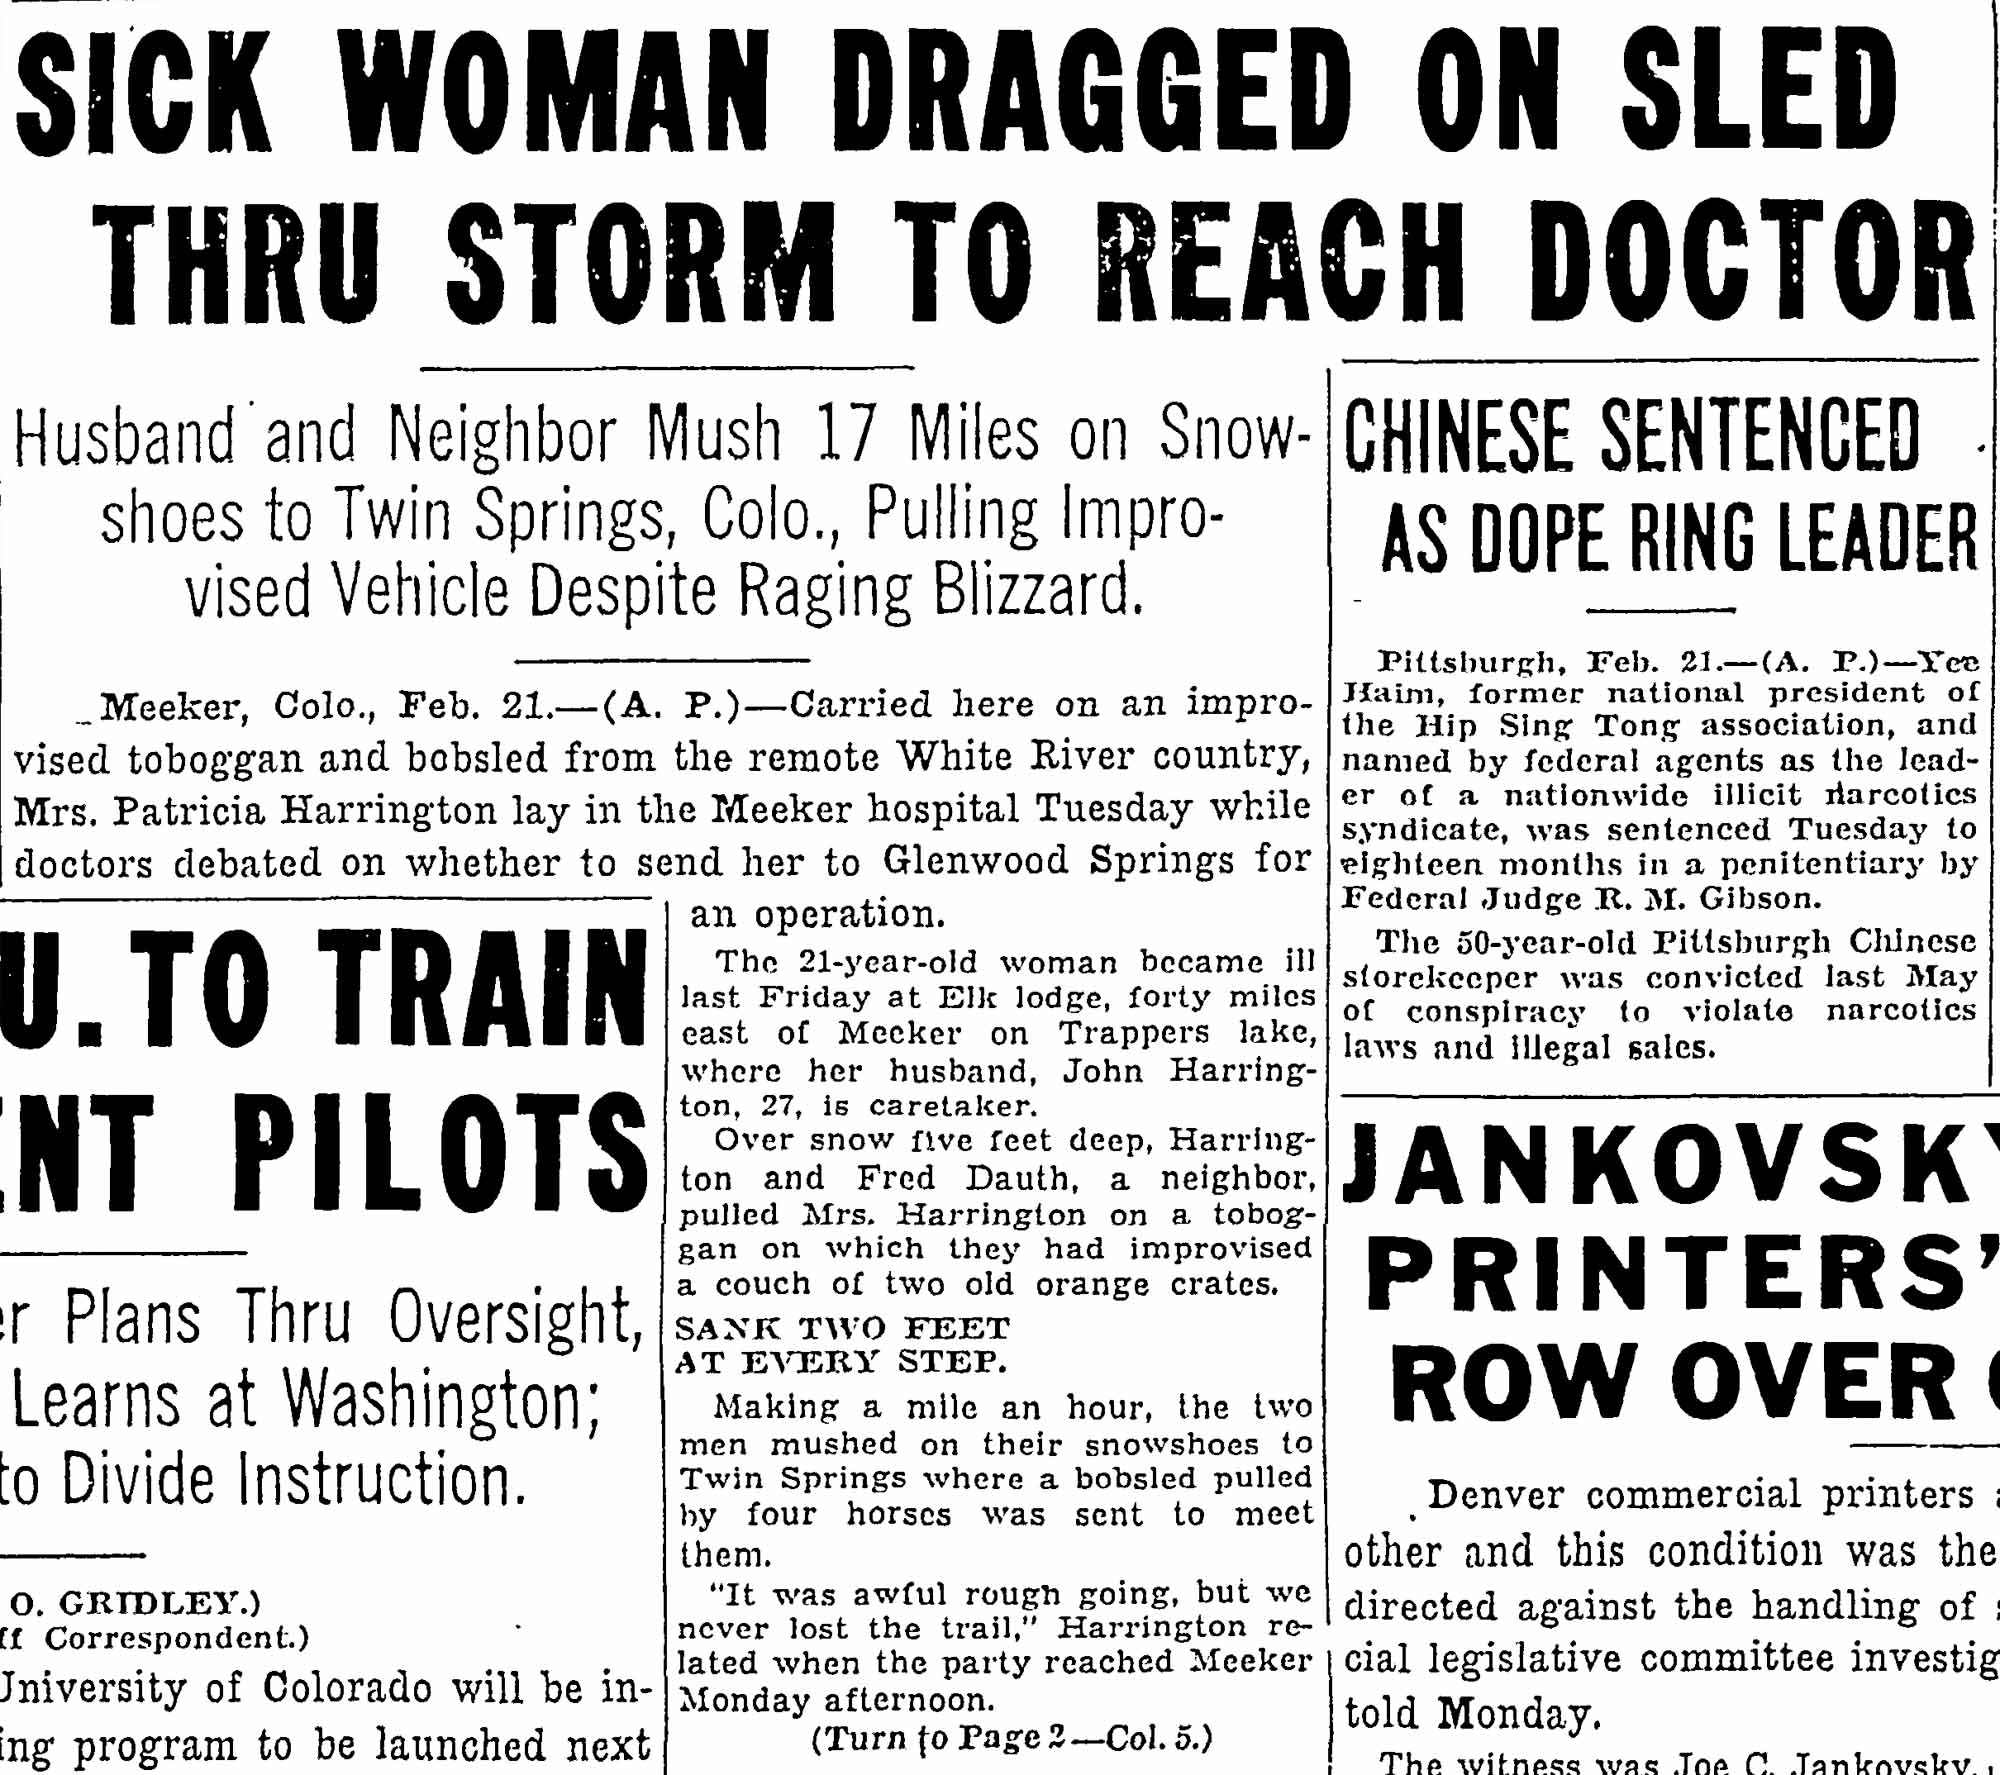 Dauth Family Archive - 1939-02-21 - Denver Post - Fred Dauth Helps Save A Sick Person During Blizzard - Part 2